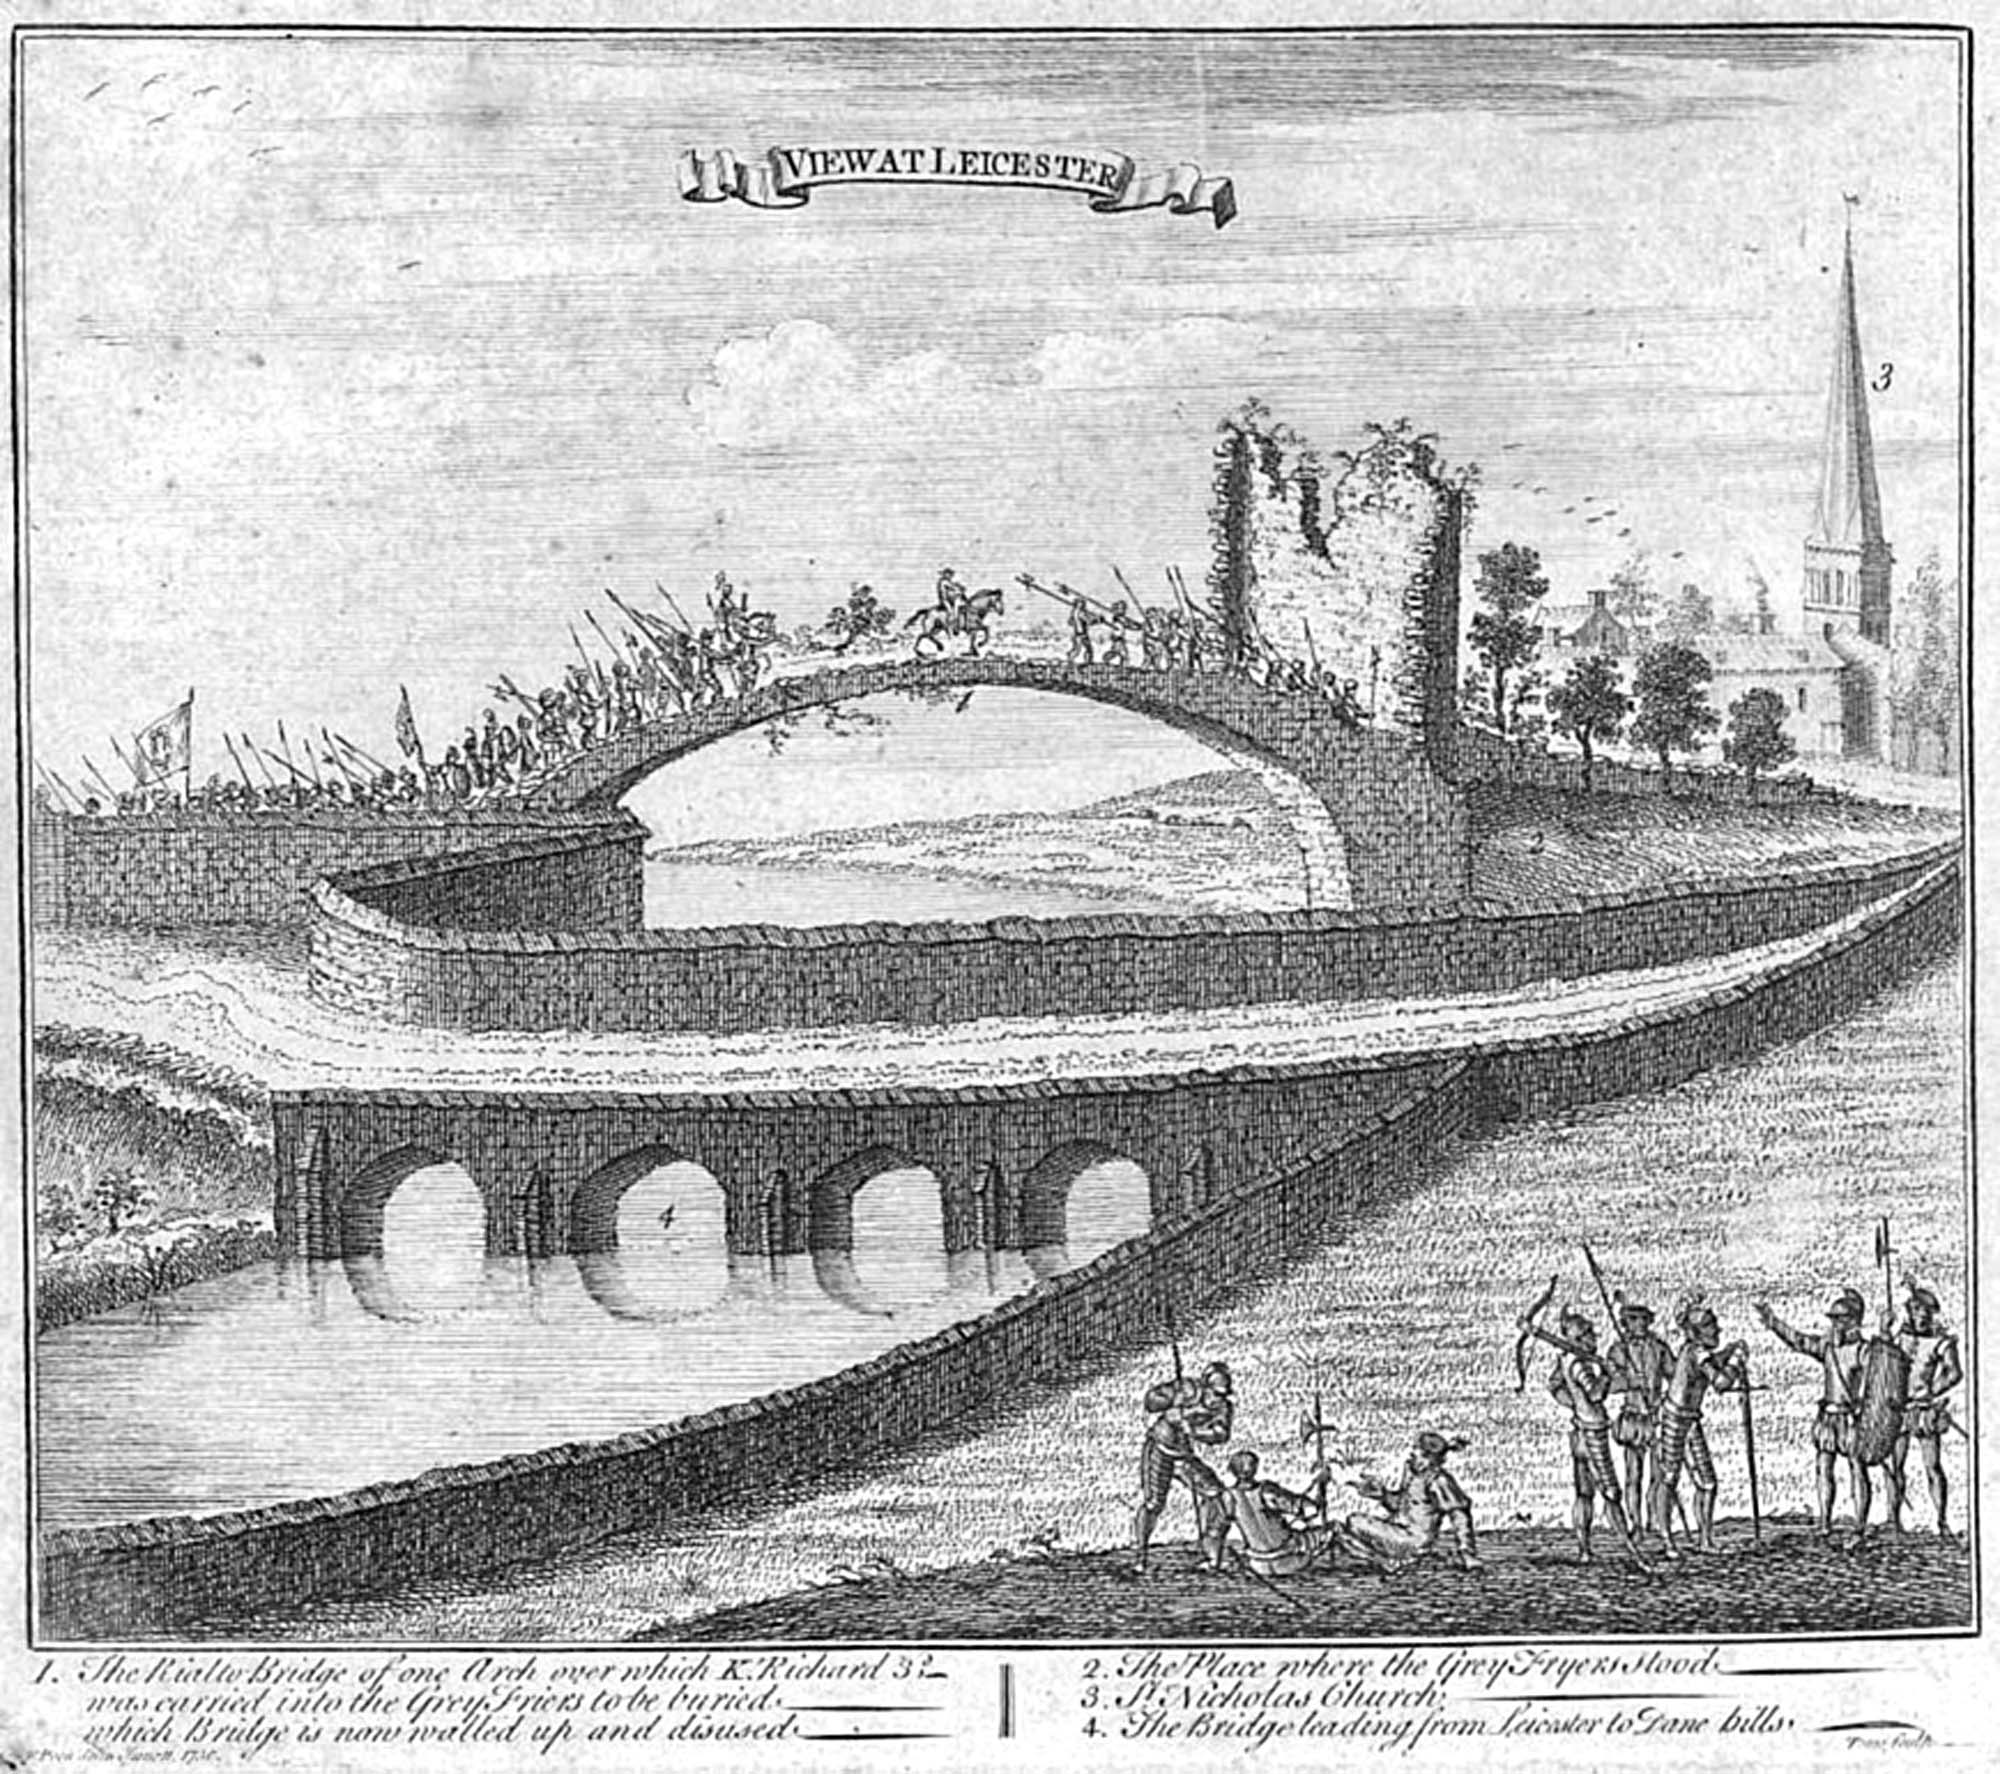 An engraving of Richard III’s body returning to Leicester over the Little Bow Bridge by Francis Peck, 1730. In reality the king’s body would have been brought back over the larger road bridge in the foreground - University of Leicester Library Special Collections